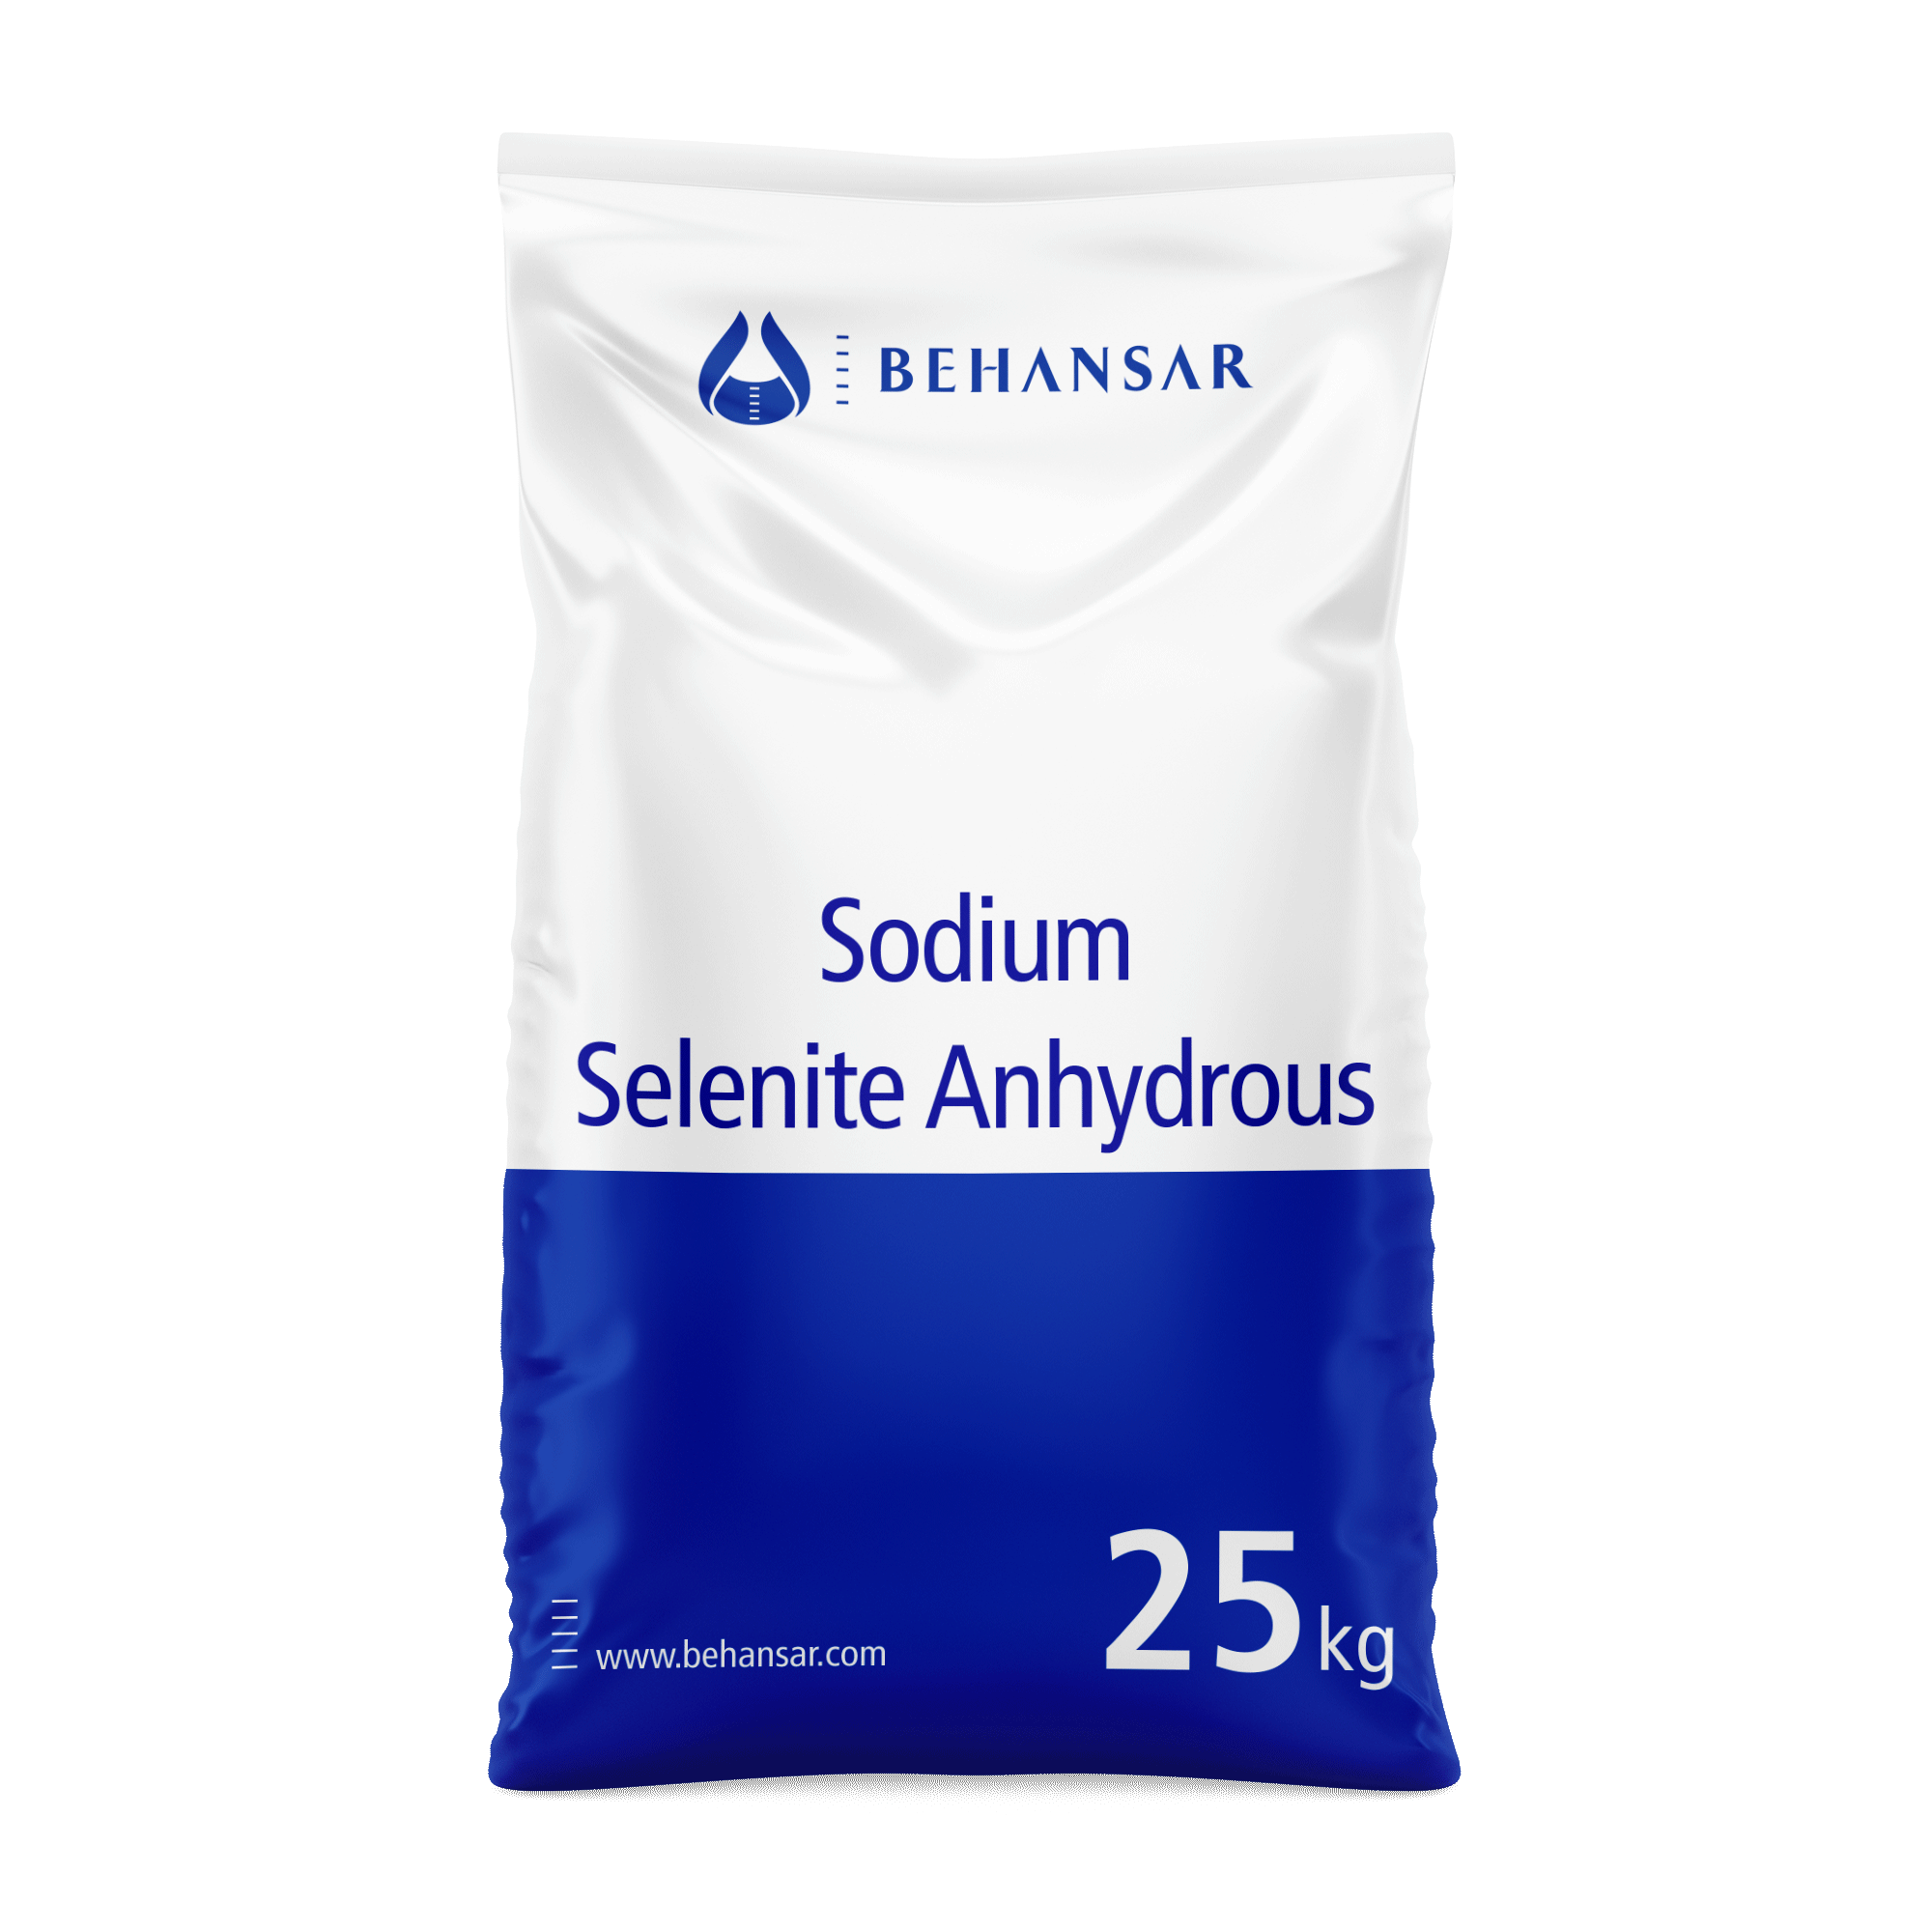 Sodium Selenite Anhydrous is one of the products of Behansar Co